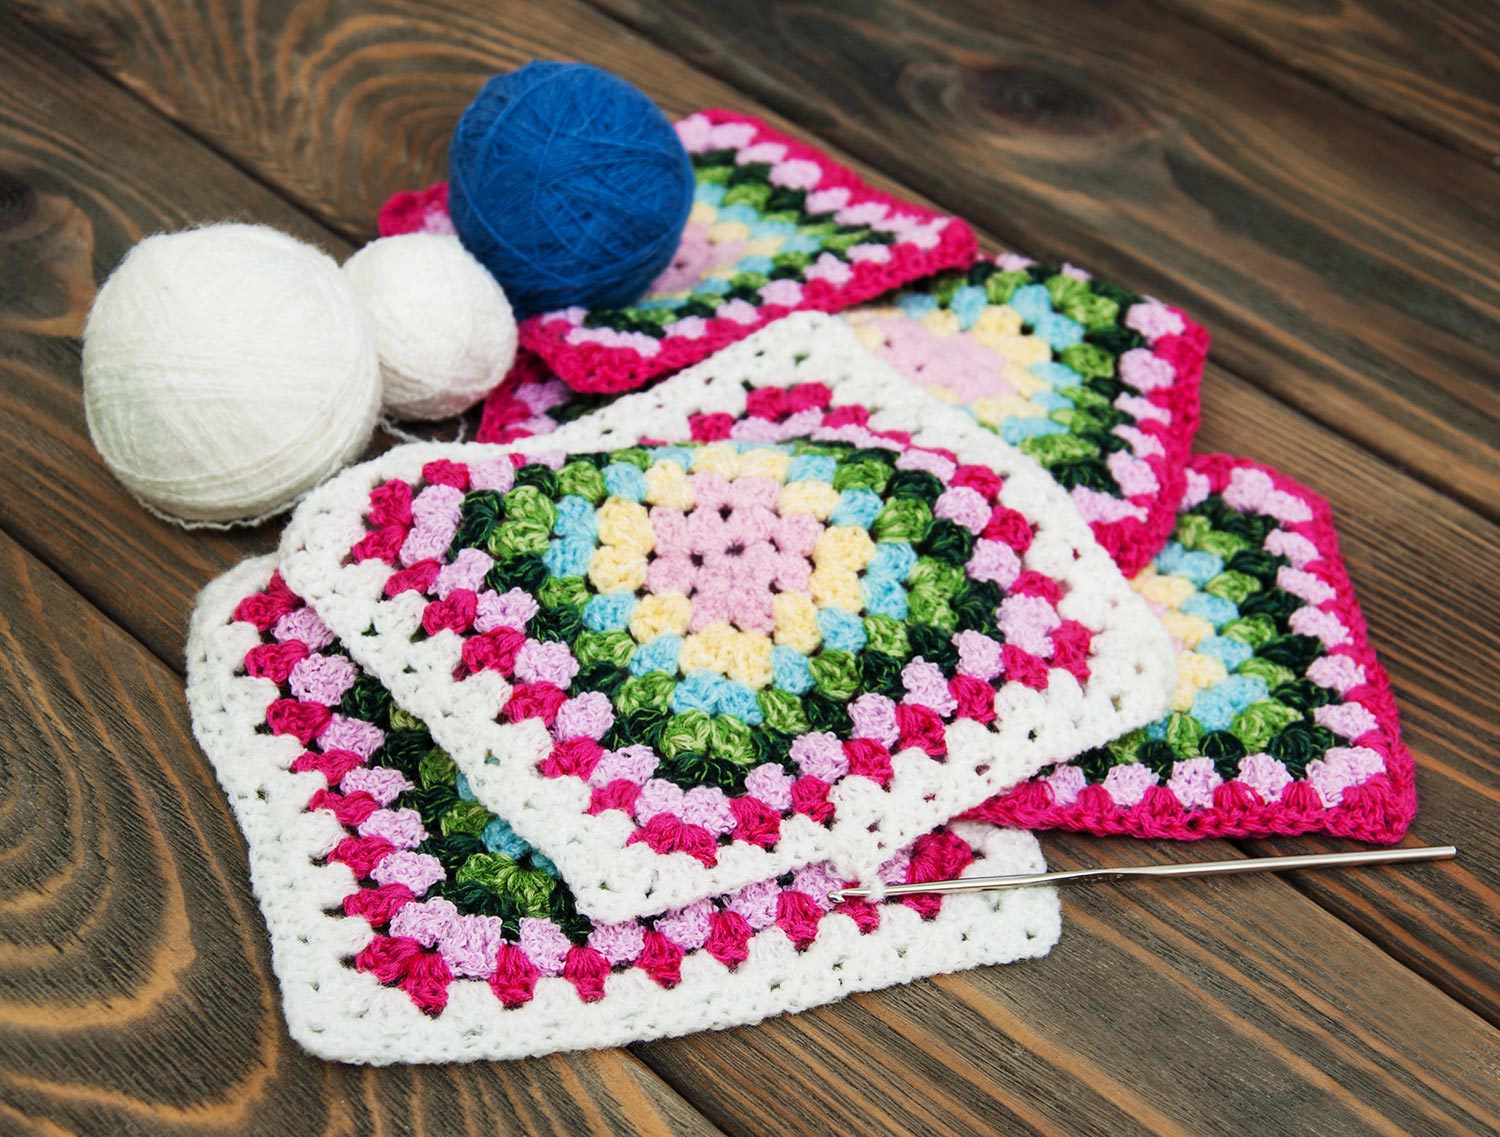 Multicolored plaid squares of crocheted